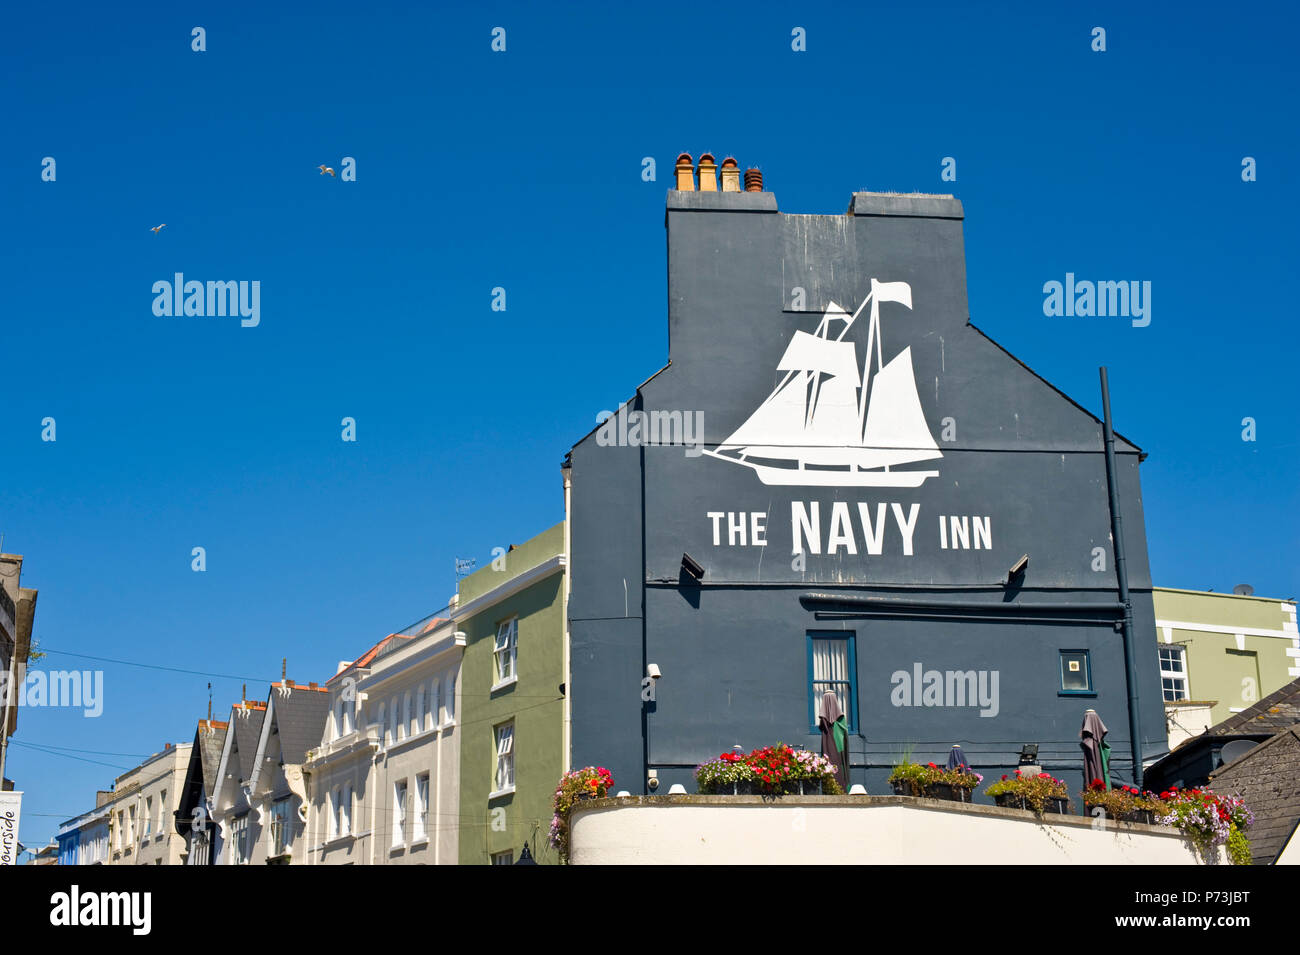 Exterior of The Navy Inn pub at The Barbican Plymouth Devon England UK Stock Photo